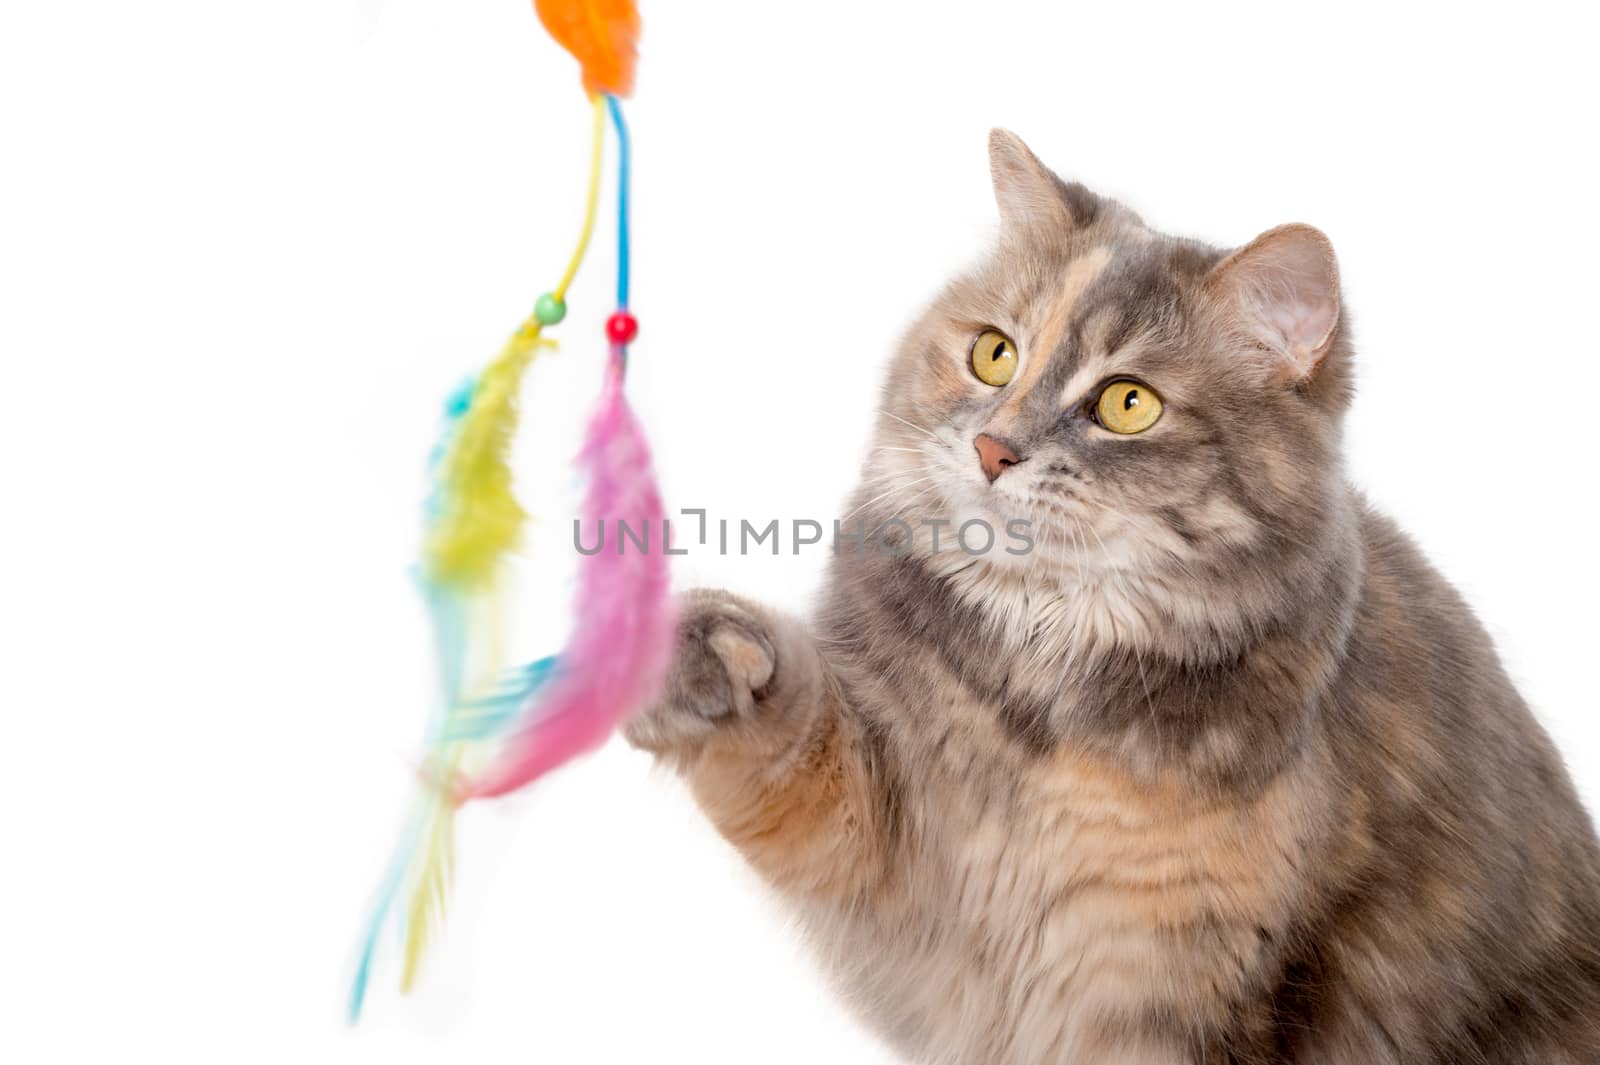 Calico cat playing with a toy over white background